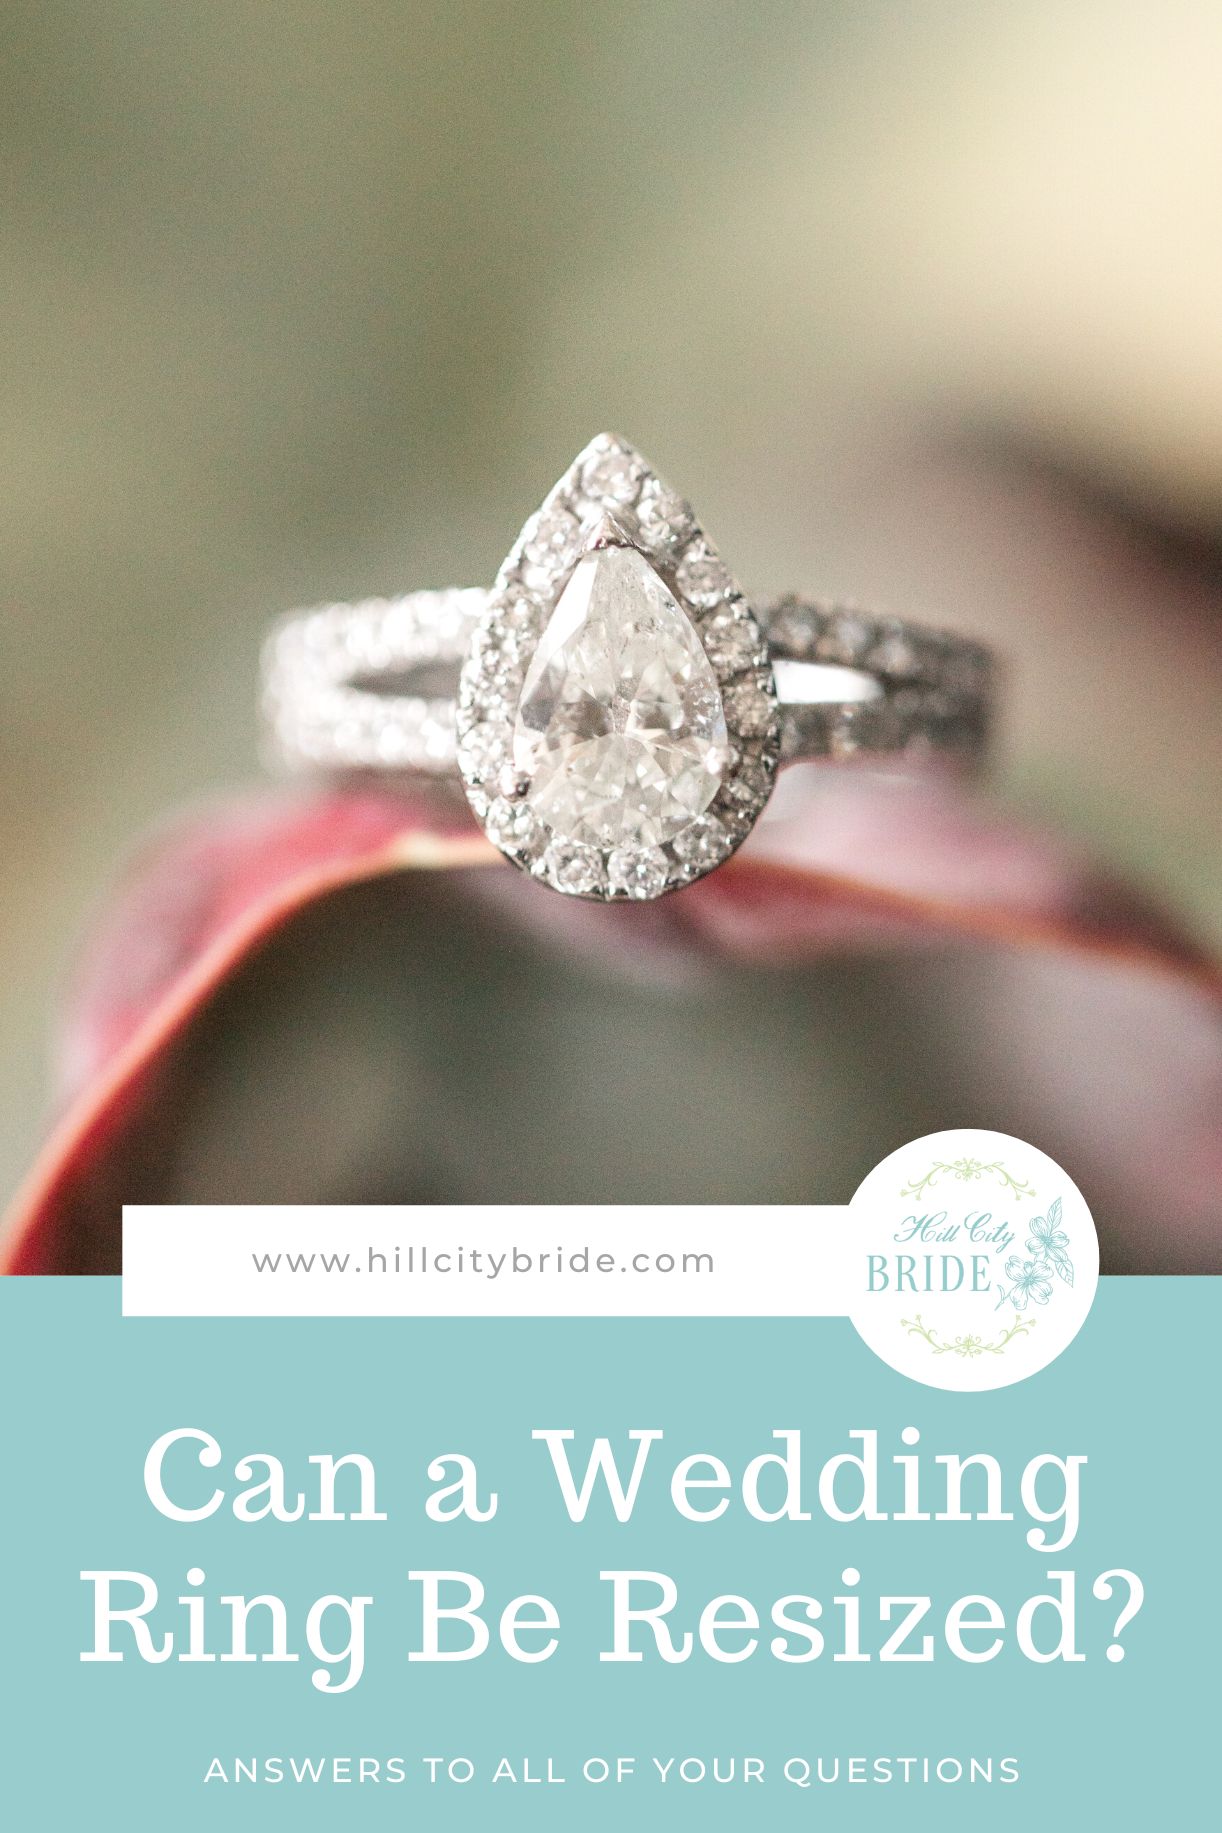 Can Wedding Rings Be Resized?